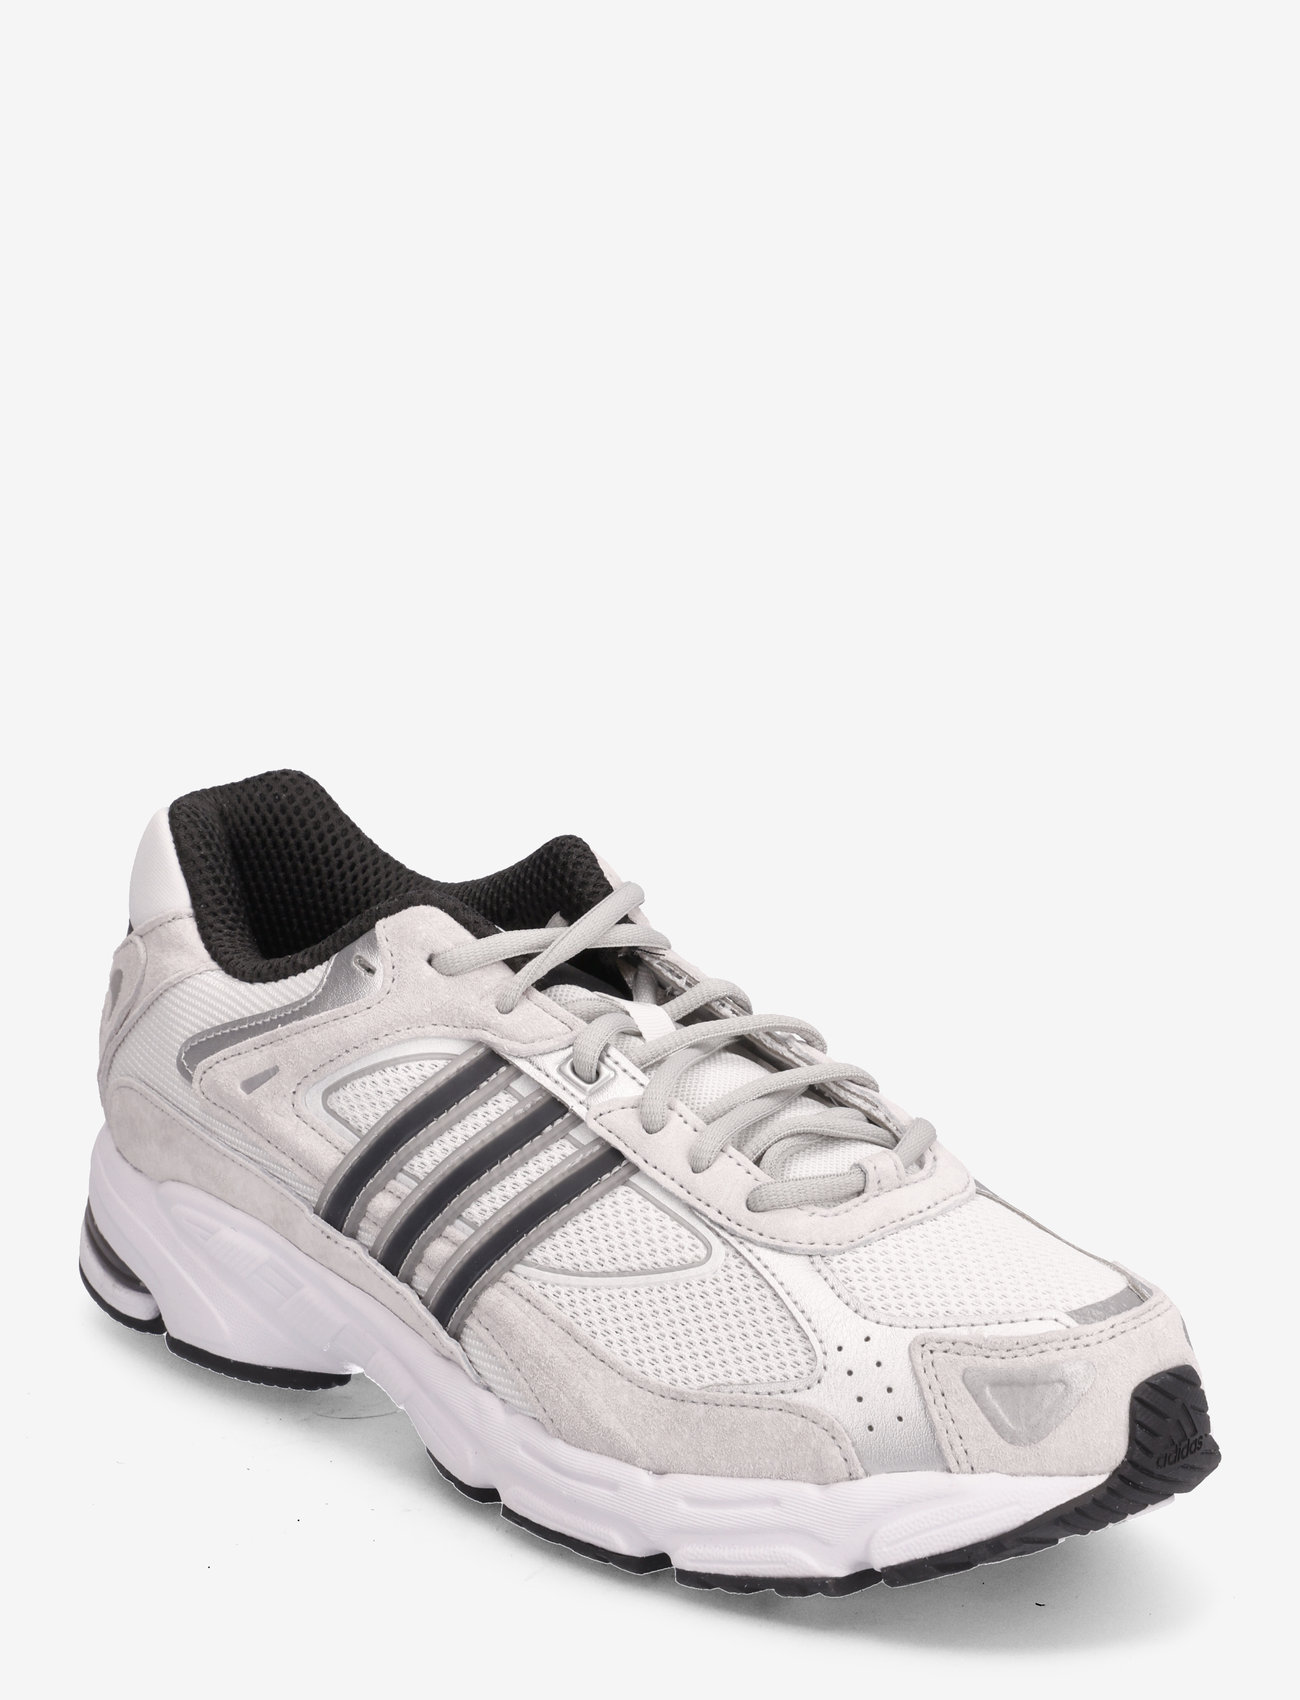 adidas Originals - Response CL Shoes - chunky sneakers - ftwwht/cblack/gretwo - 0